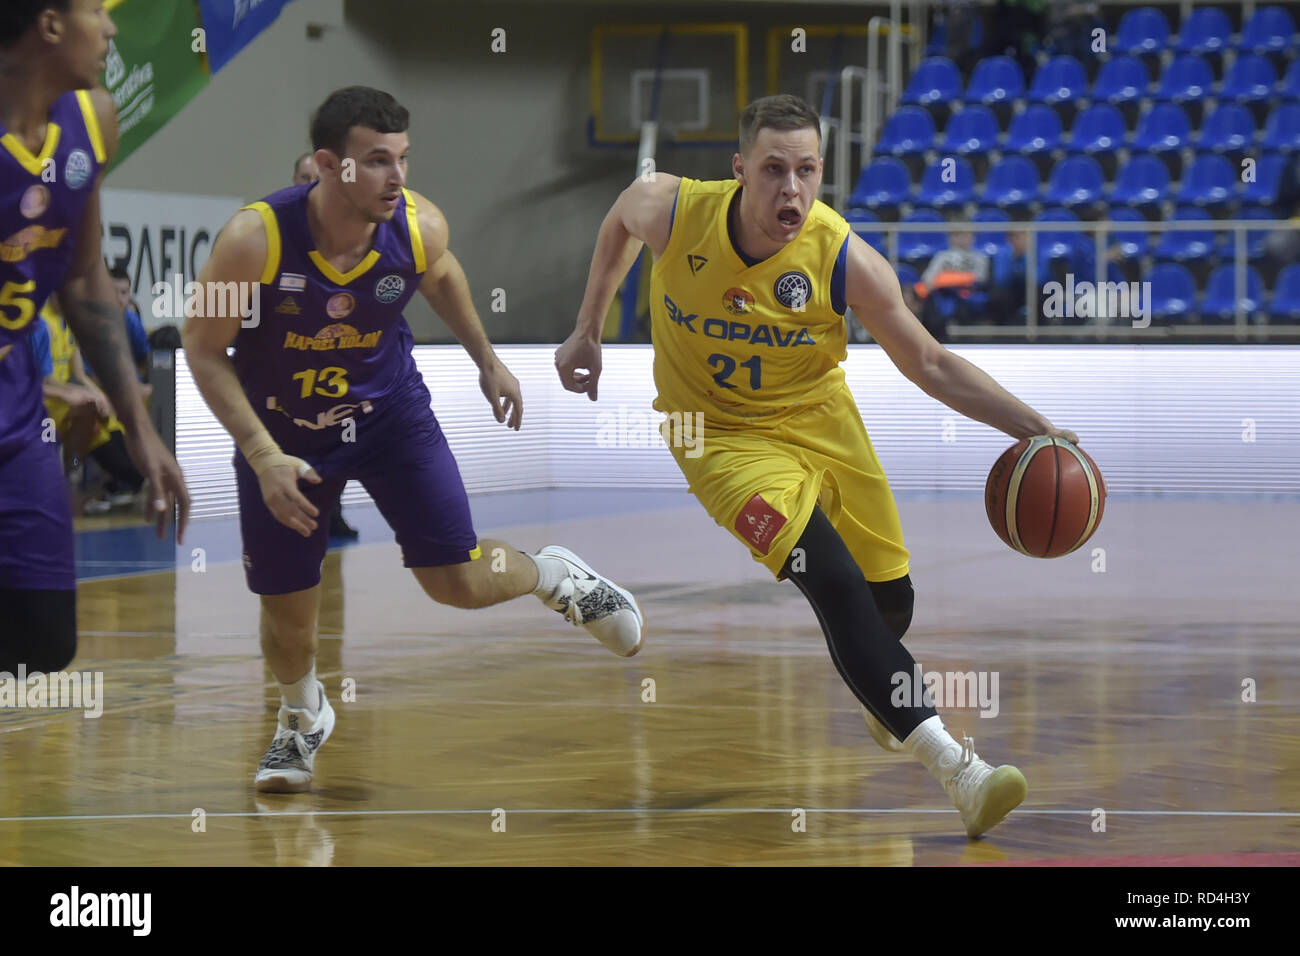 Opava, Czech Republic. 16th Jan, 2019. L-R Roi Huber (Hapoel) and Radovan  Kouril (Opava) in action